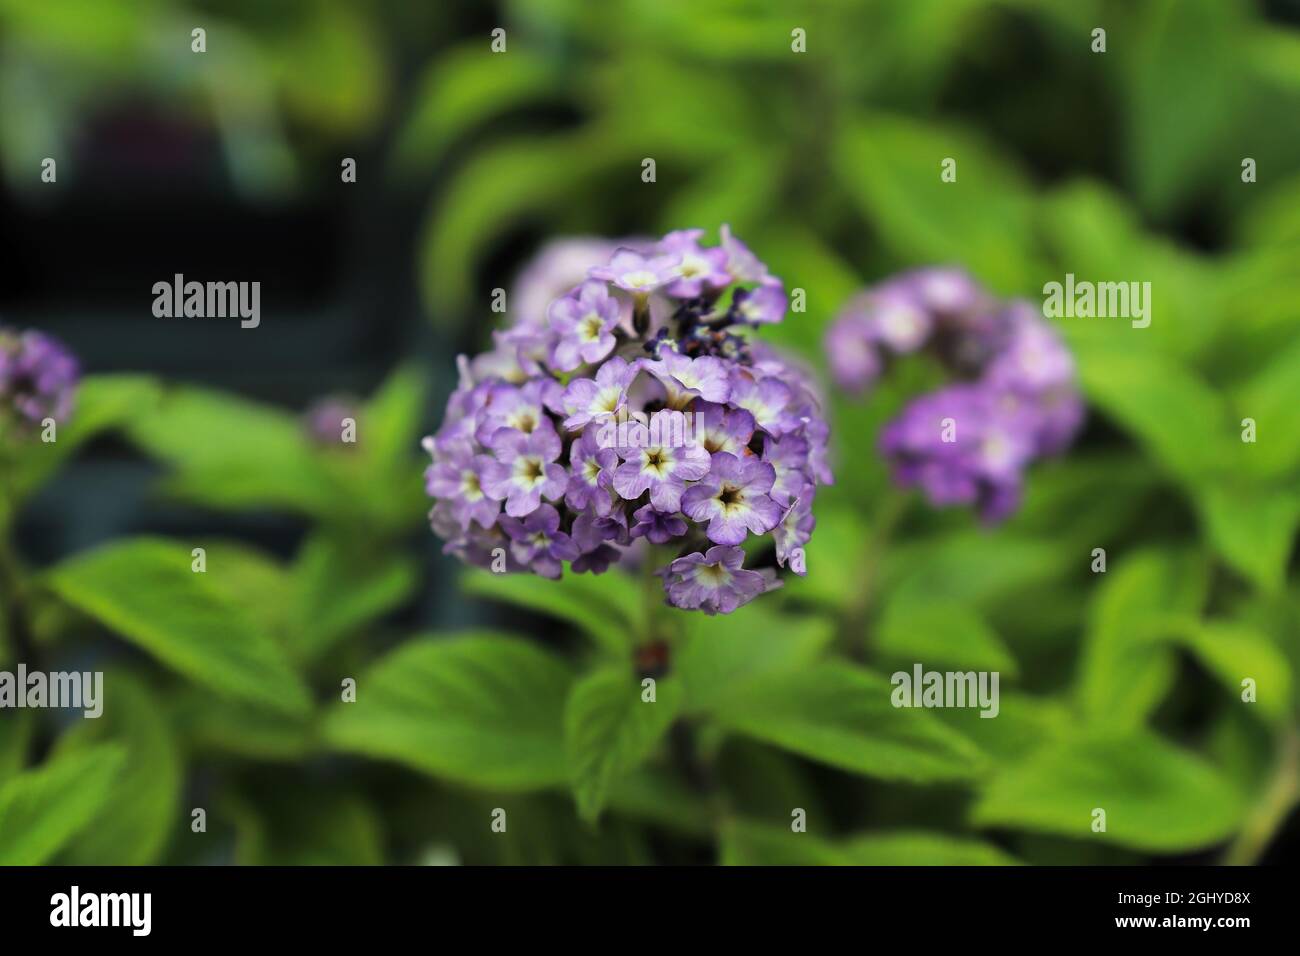 Closeup of a puple heliotrope flower cluster with leaves Stock Photo